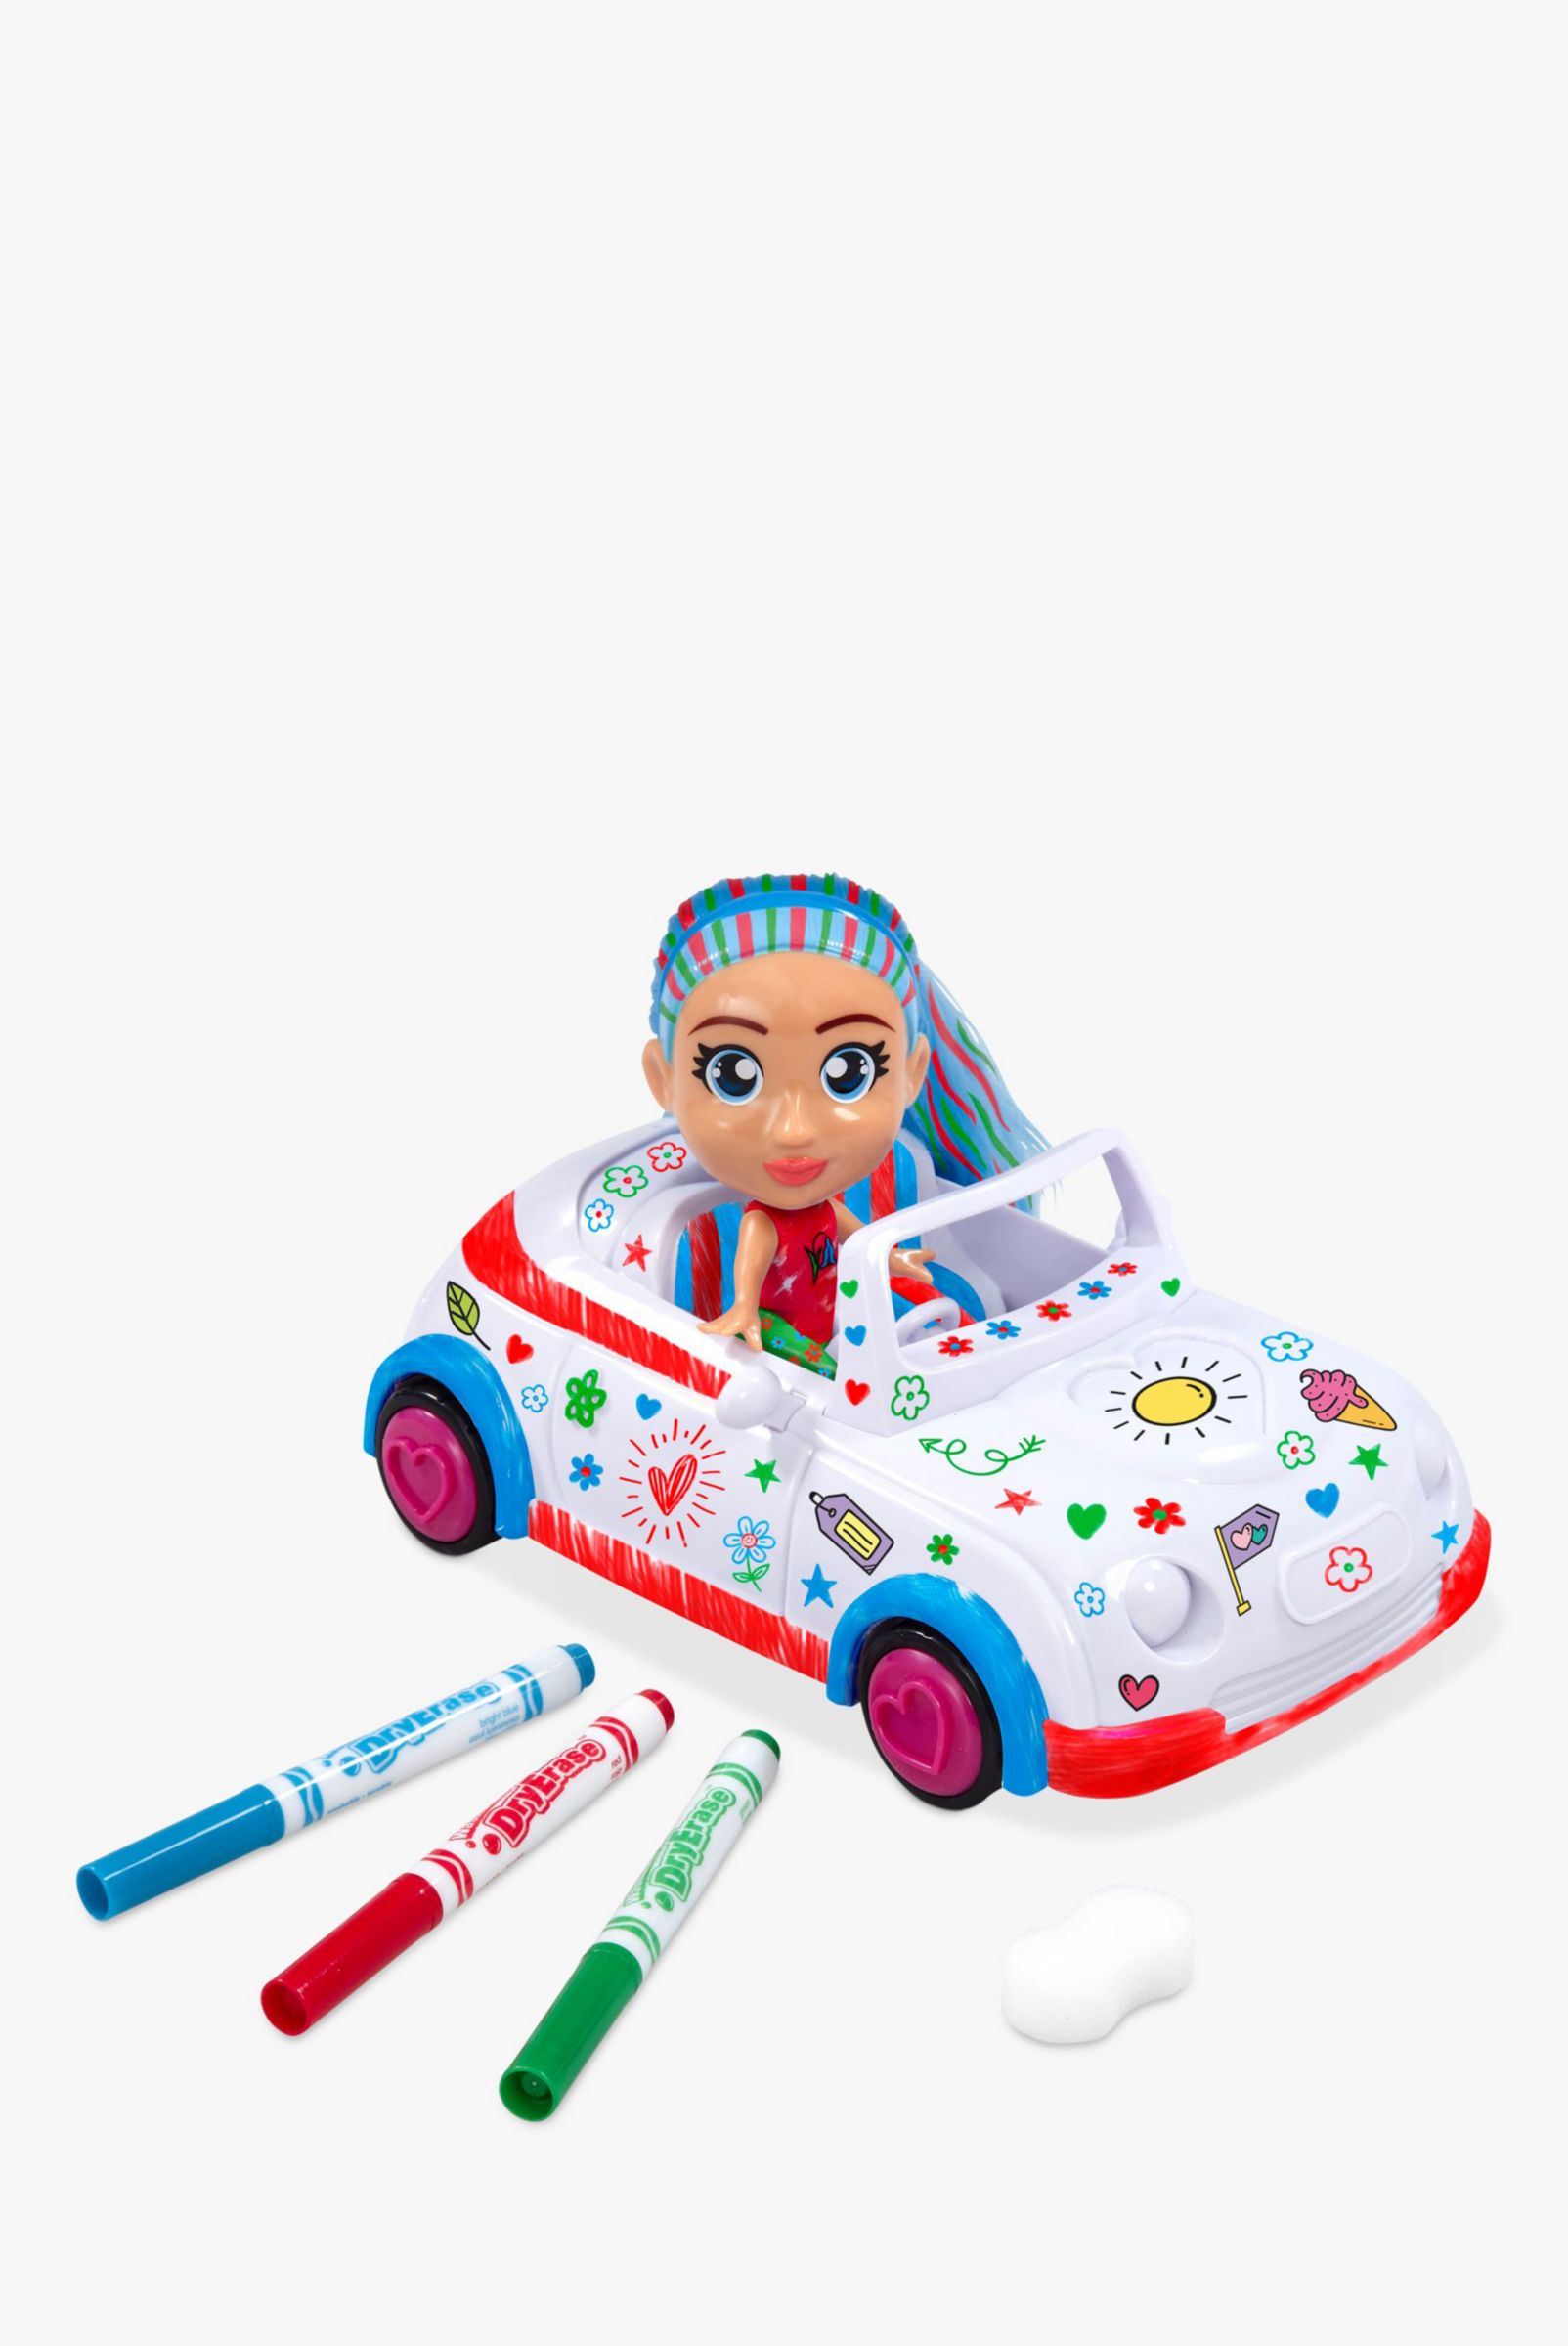 Crayola Colour n Style Friends Bluebell Deluxe Playset, £26.99